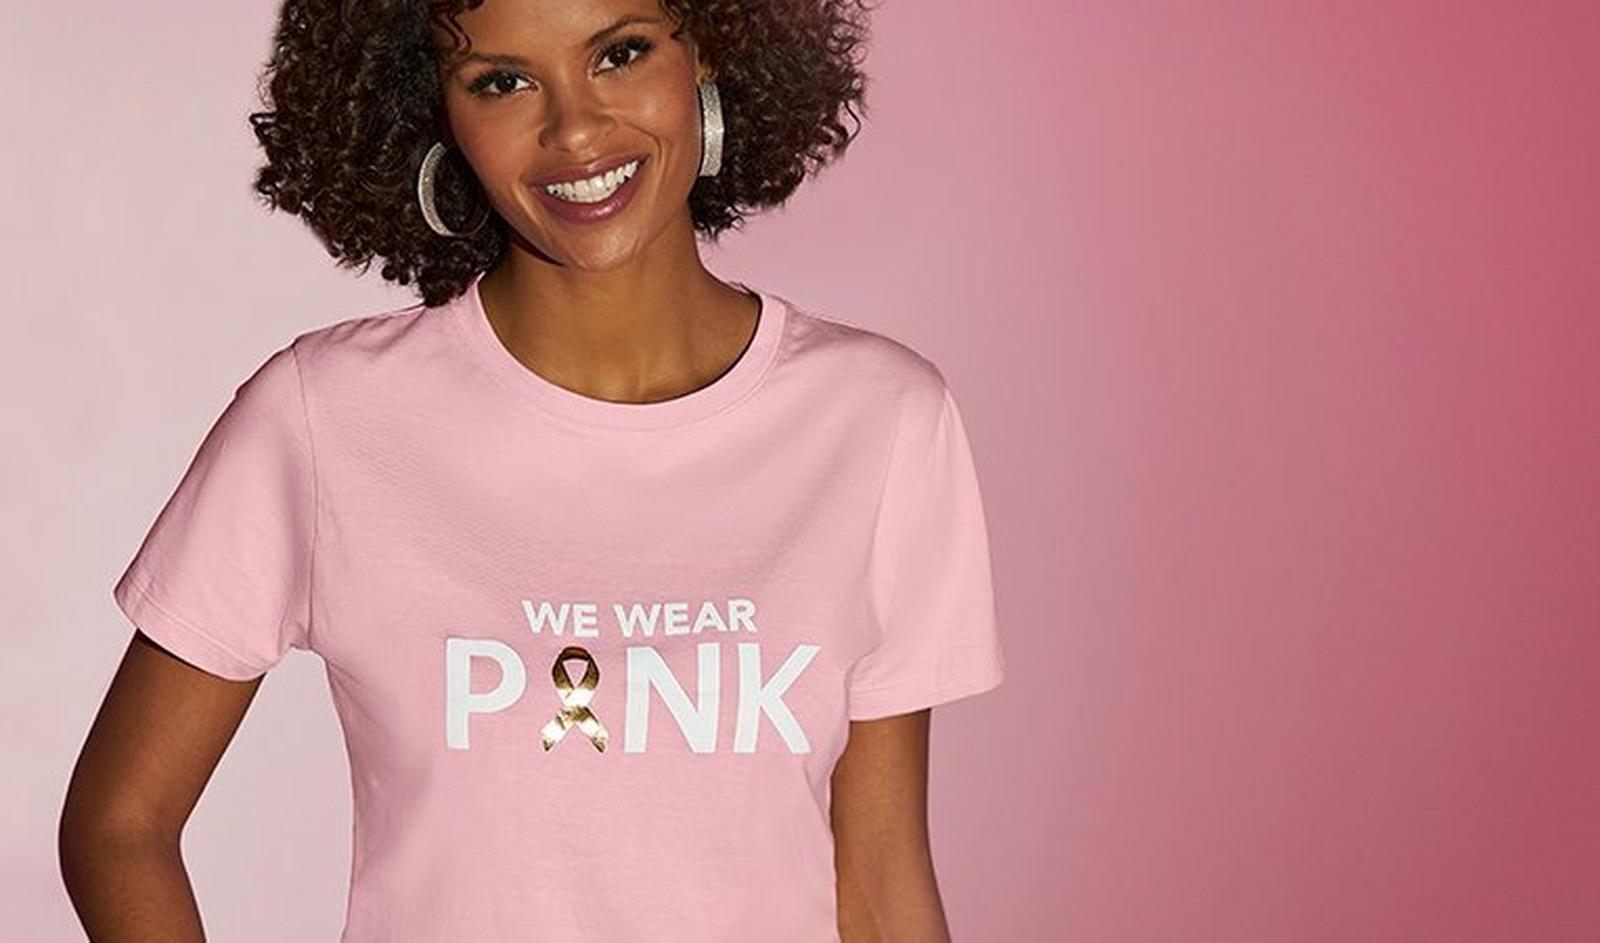 model wearing a pink breast cancer awareness themed shirt that says 